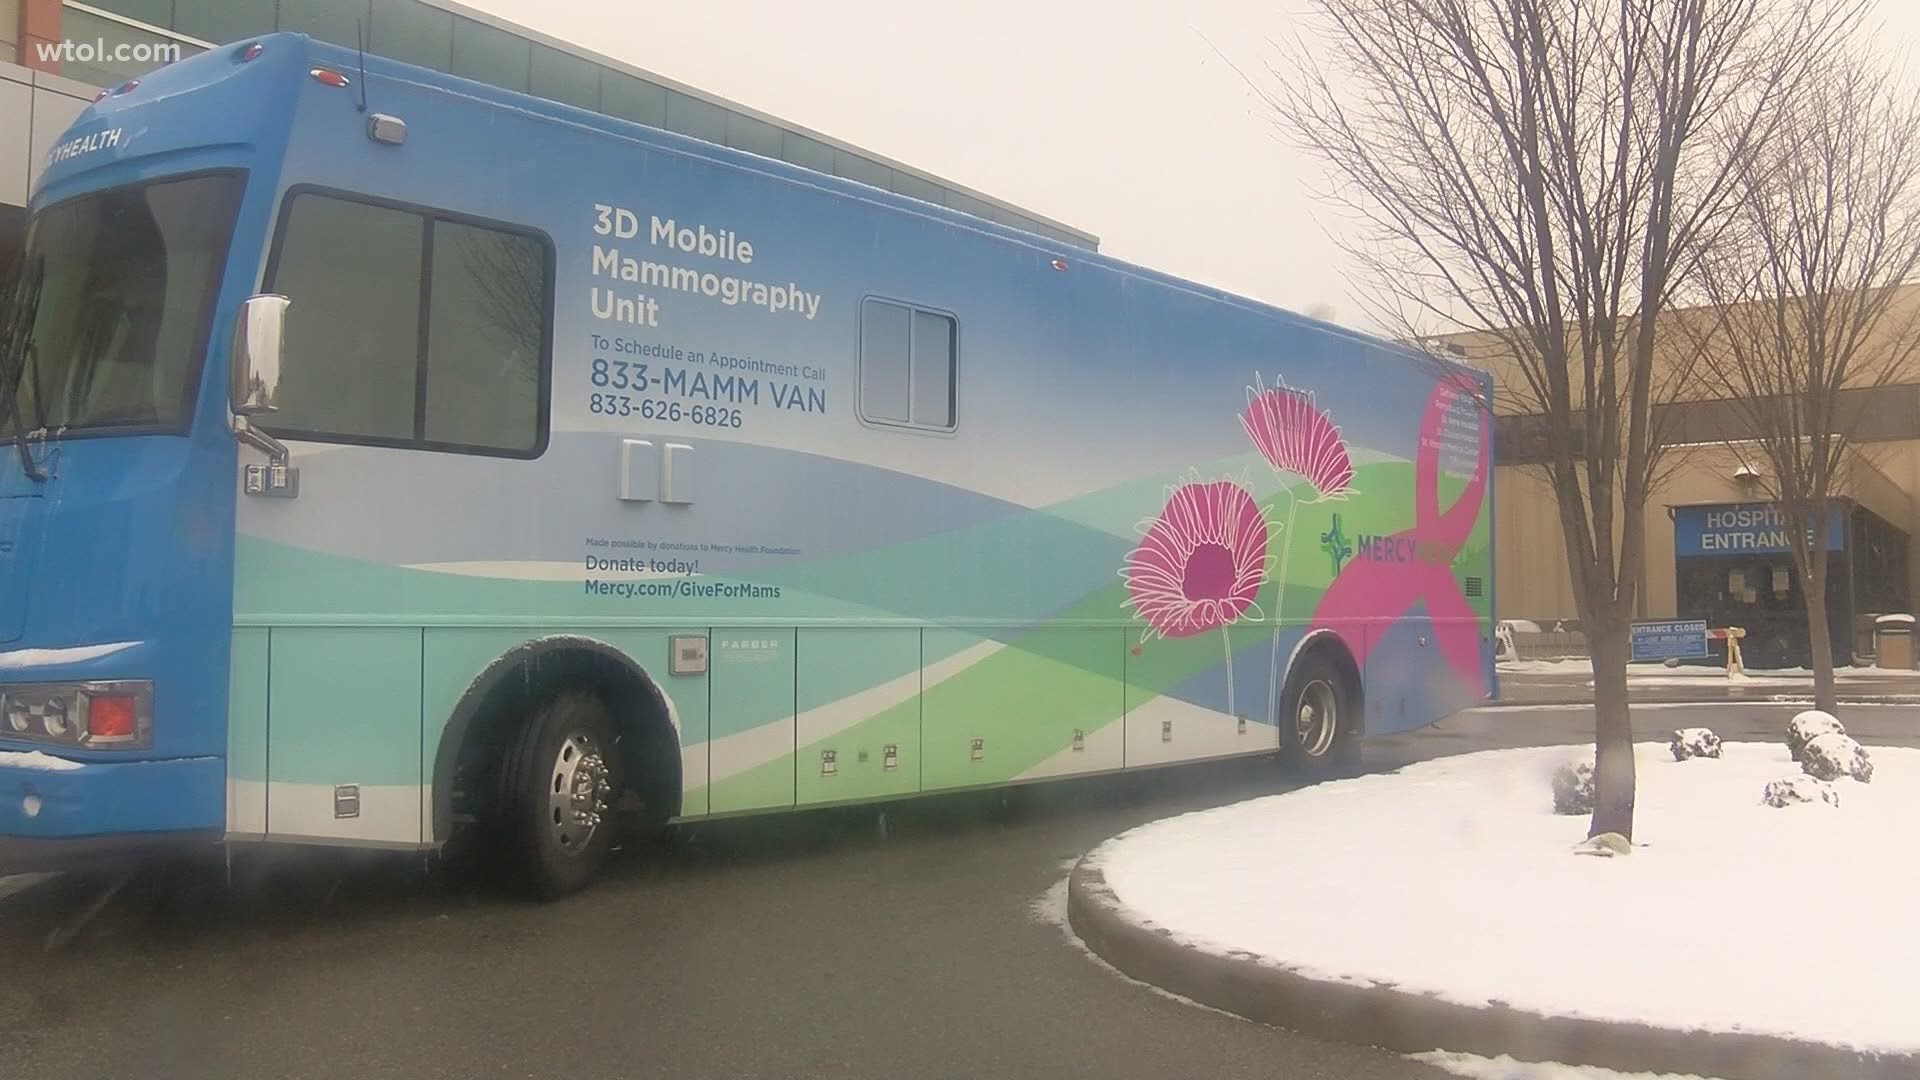 In February, the Mercy Health – Toledo Mobile Mammography Van will bring mammography services to cities, suburbs and rural communities throughout northwest Ohio.